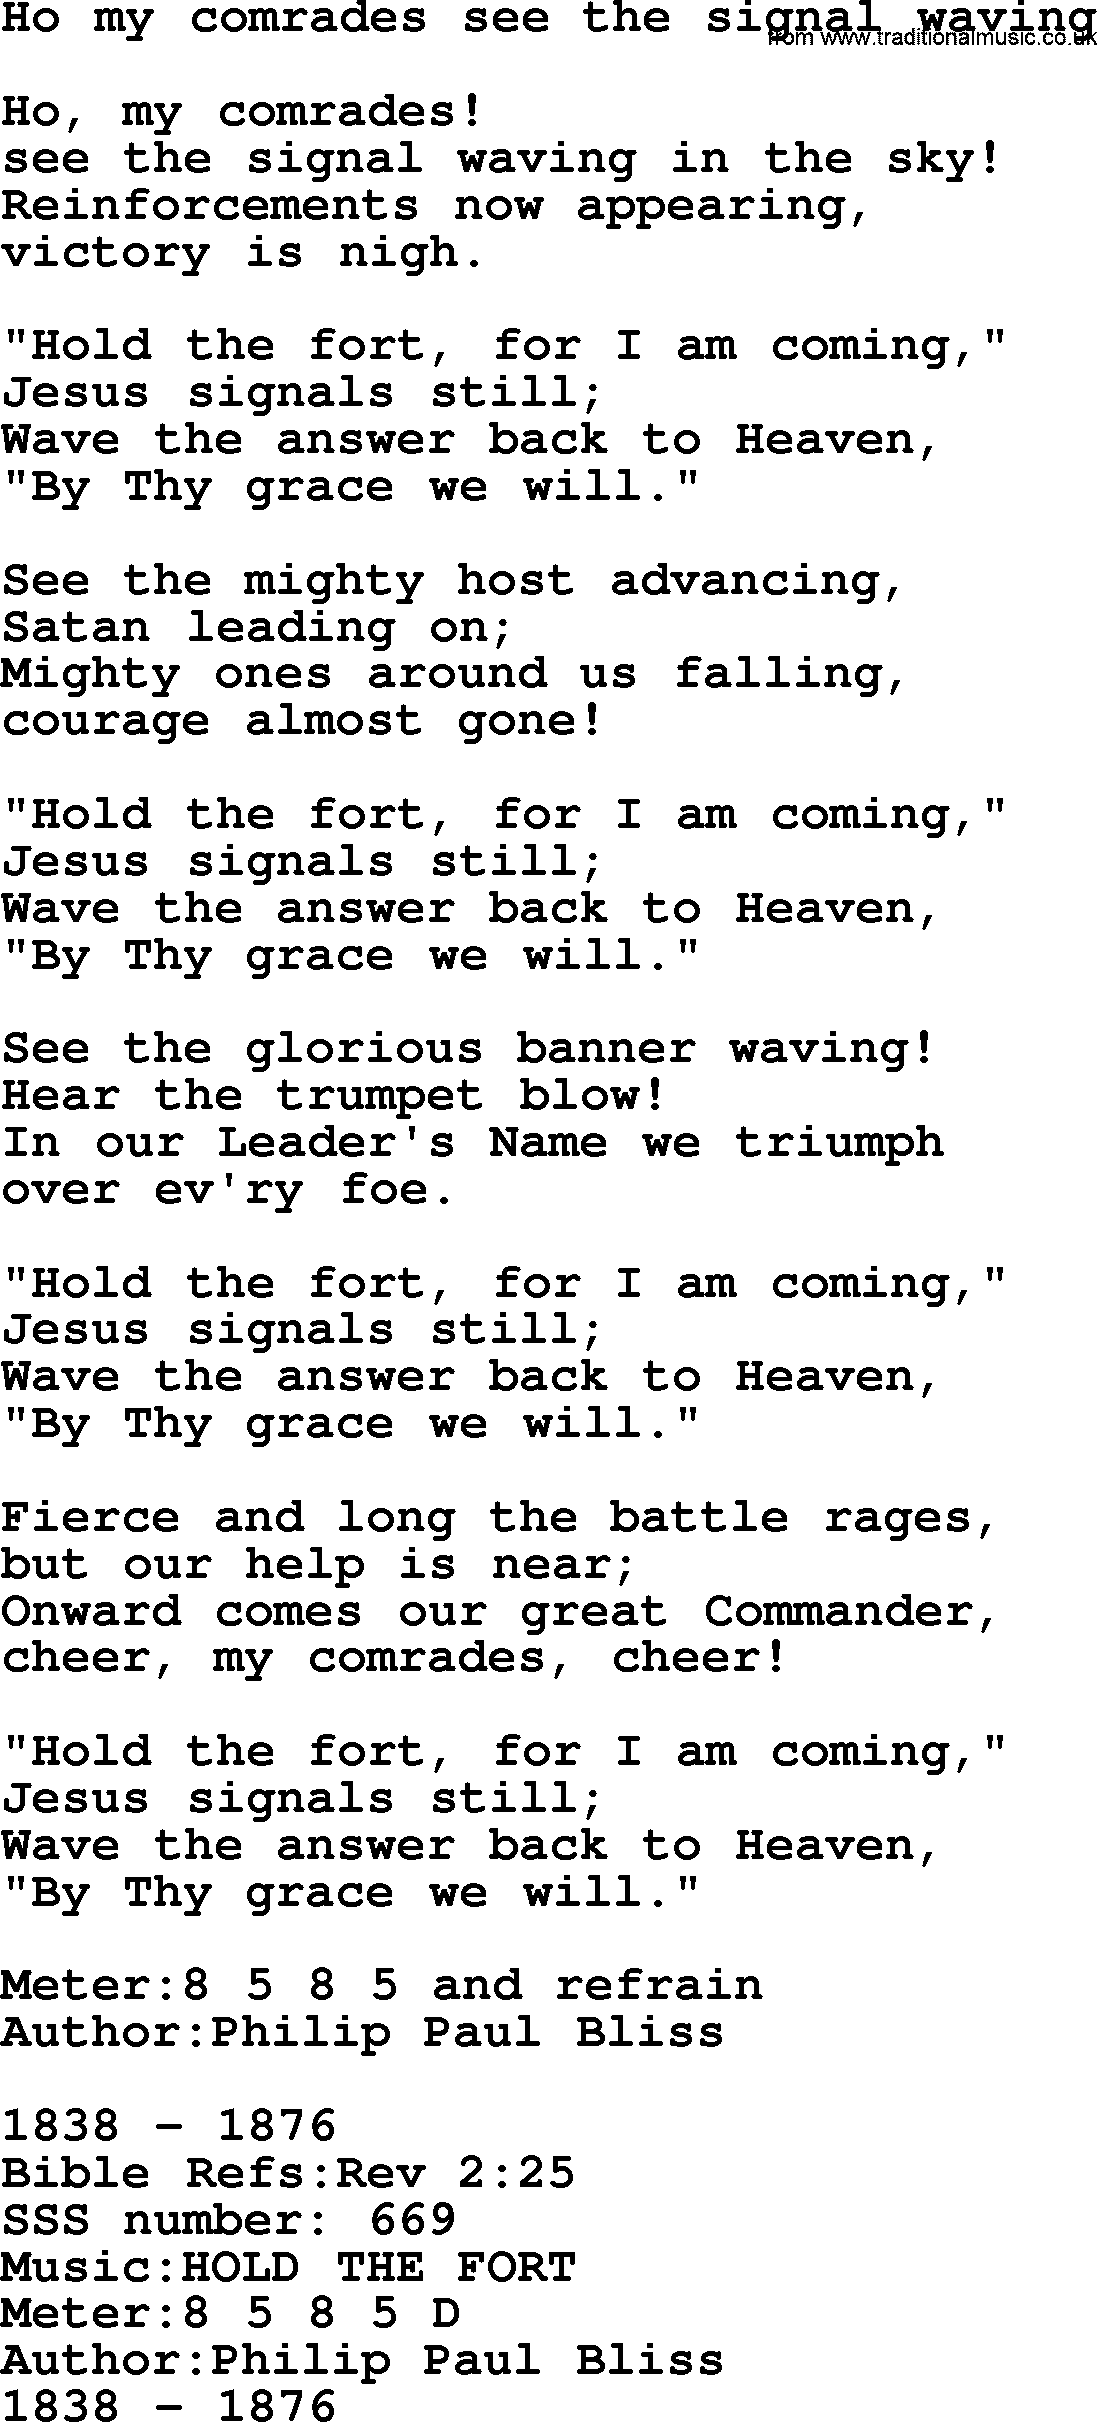 Sacred Songs and Solos complete, 1200 Hymns, title: Ho My Comrades See The Signal Waving, lyrics and PDF